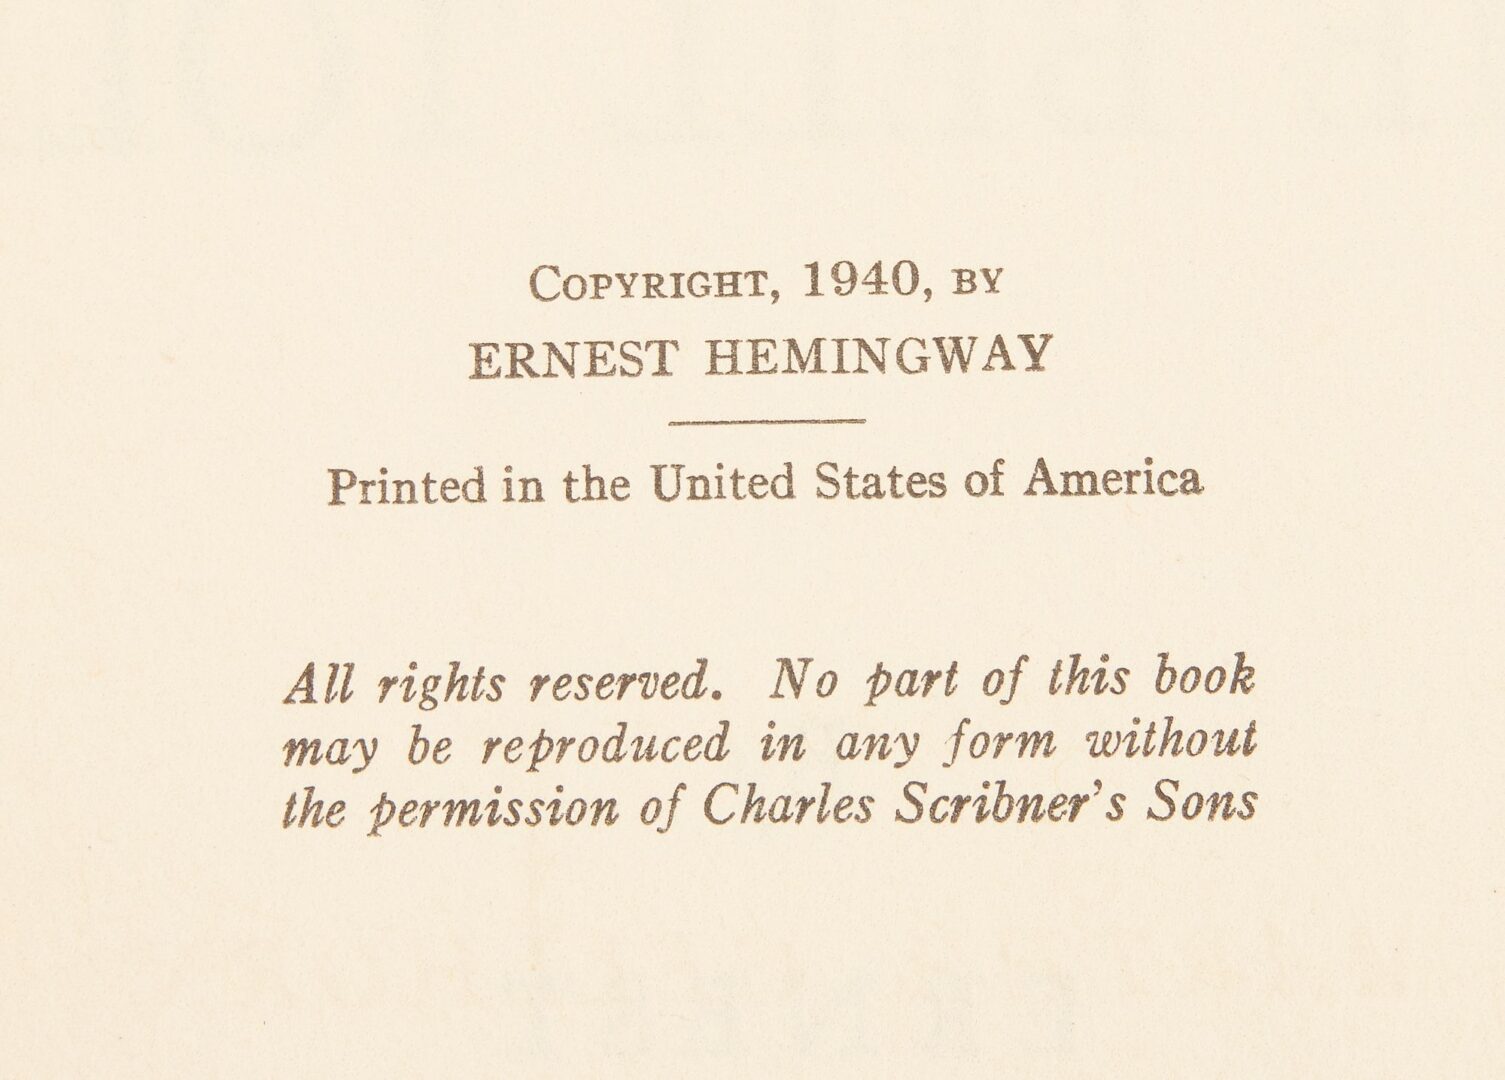 Lot 594: Ernest Hemingway , For Whom the Bell Tolls, Signed